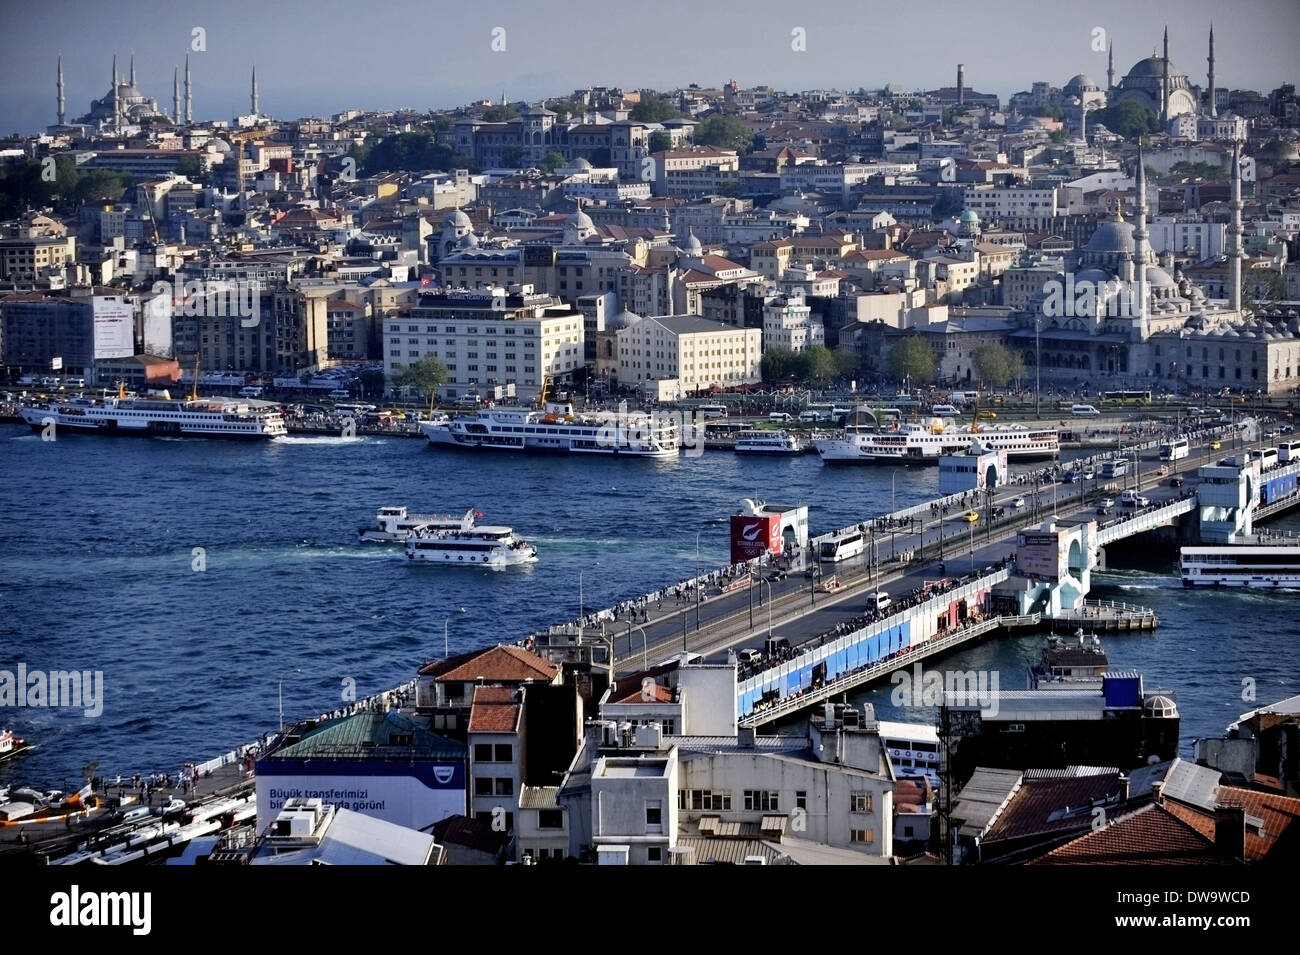 Istanbul, Turkey - May 3, 2013: Galata Bridge and the Golden Horn view from Galata Tower on May 3, 2013 in Istanbul. Stock Photo